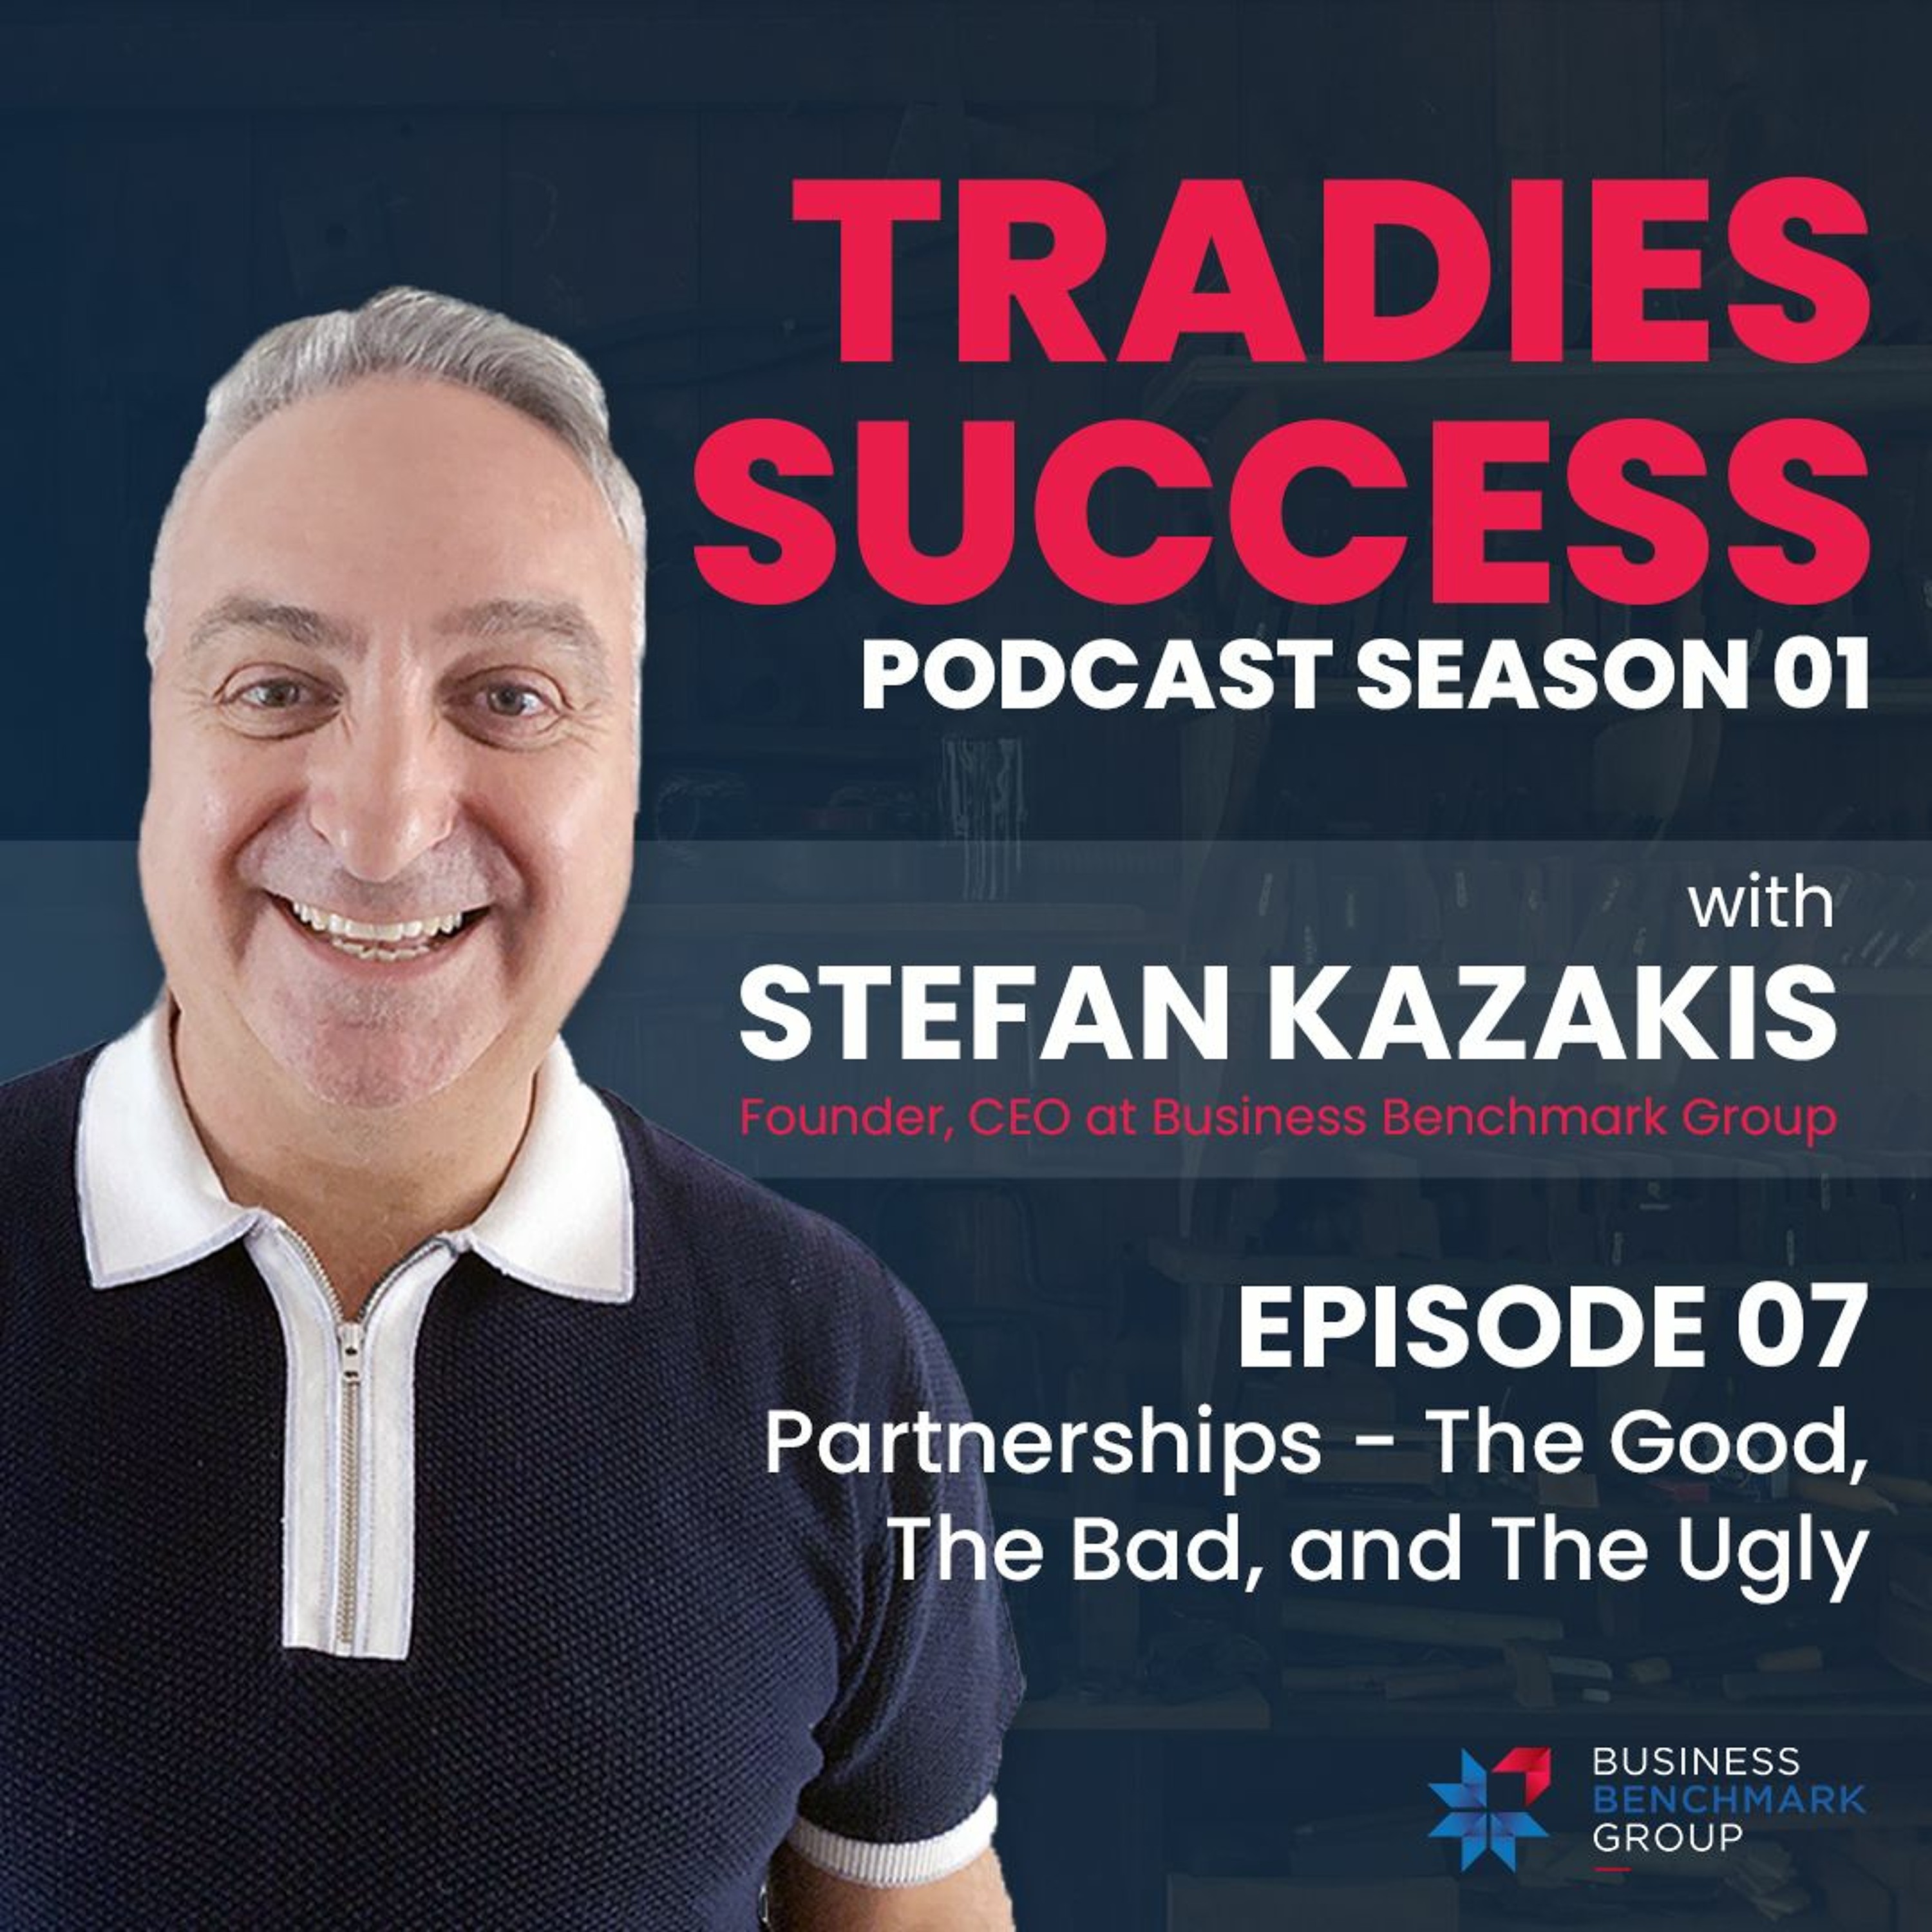 Partnerships - The Good, The Bad, and The Ugly | Tradies Success S01, EP07